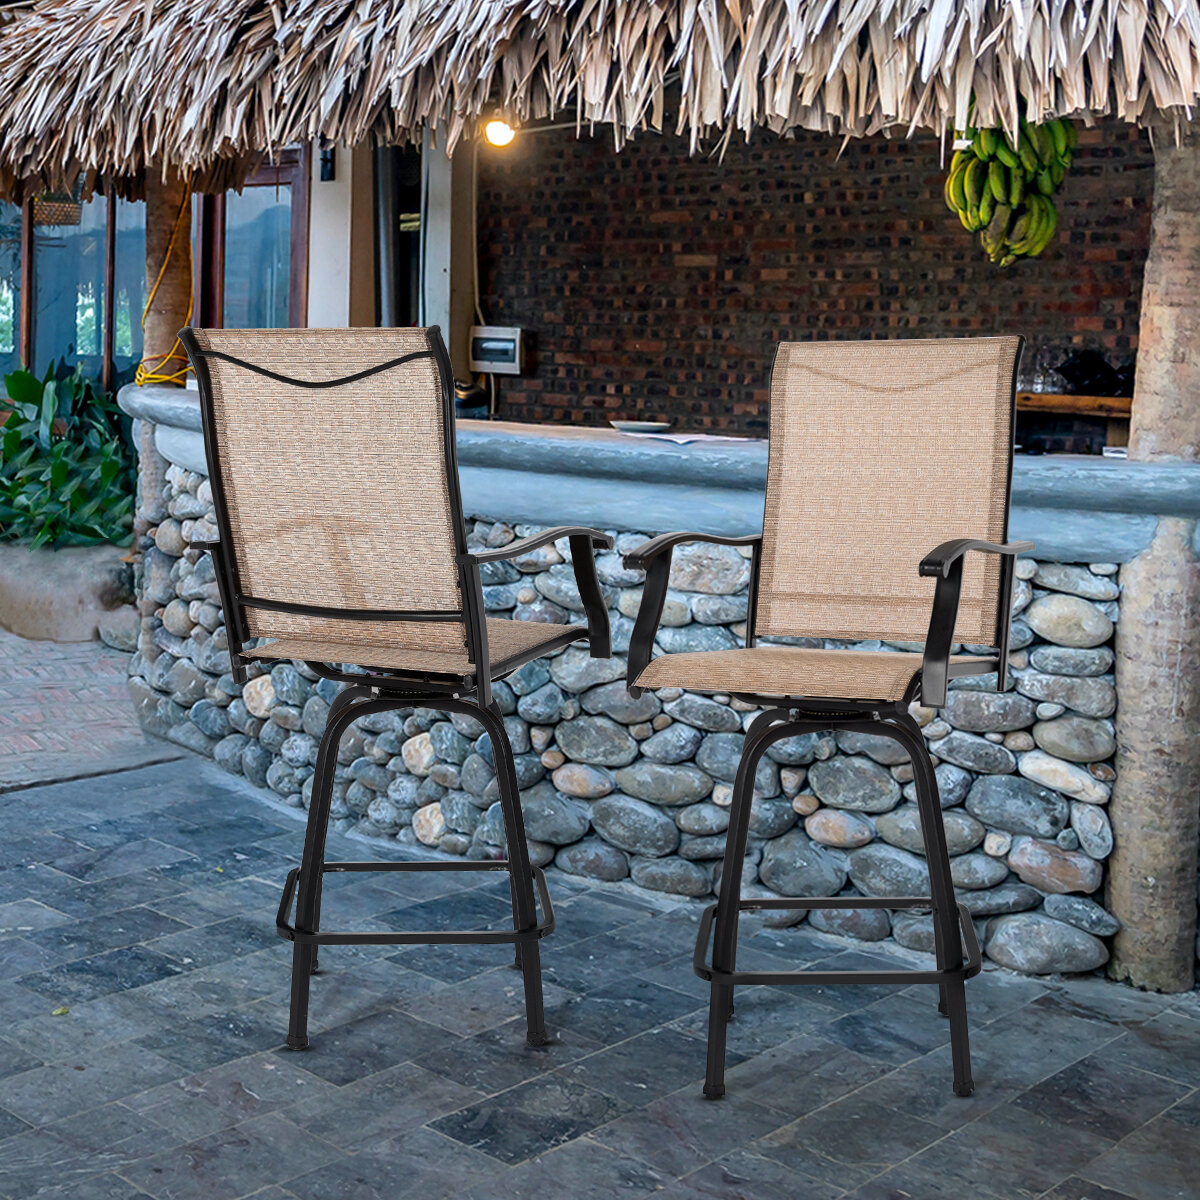 Backyard All Weather Furniture Set Garden High Top Patio Chairs Patio Bar Stools Textilene for Bistro Lawn Gray Swivel Outdoor Bar Stools Set of 2 